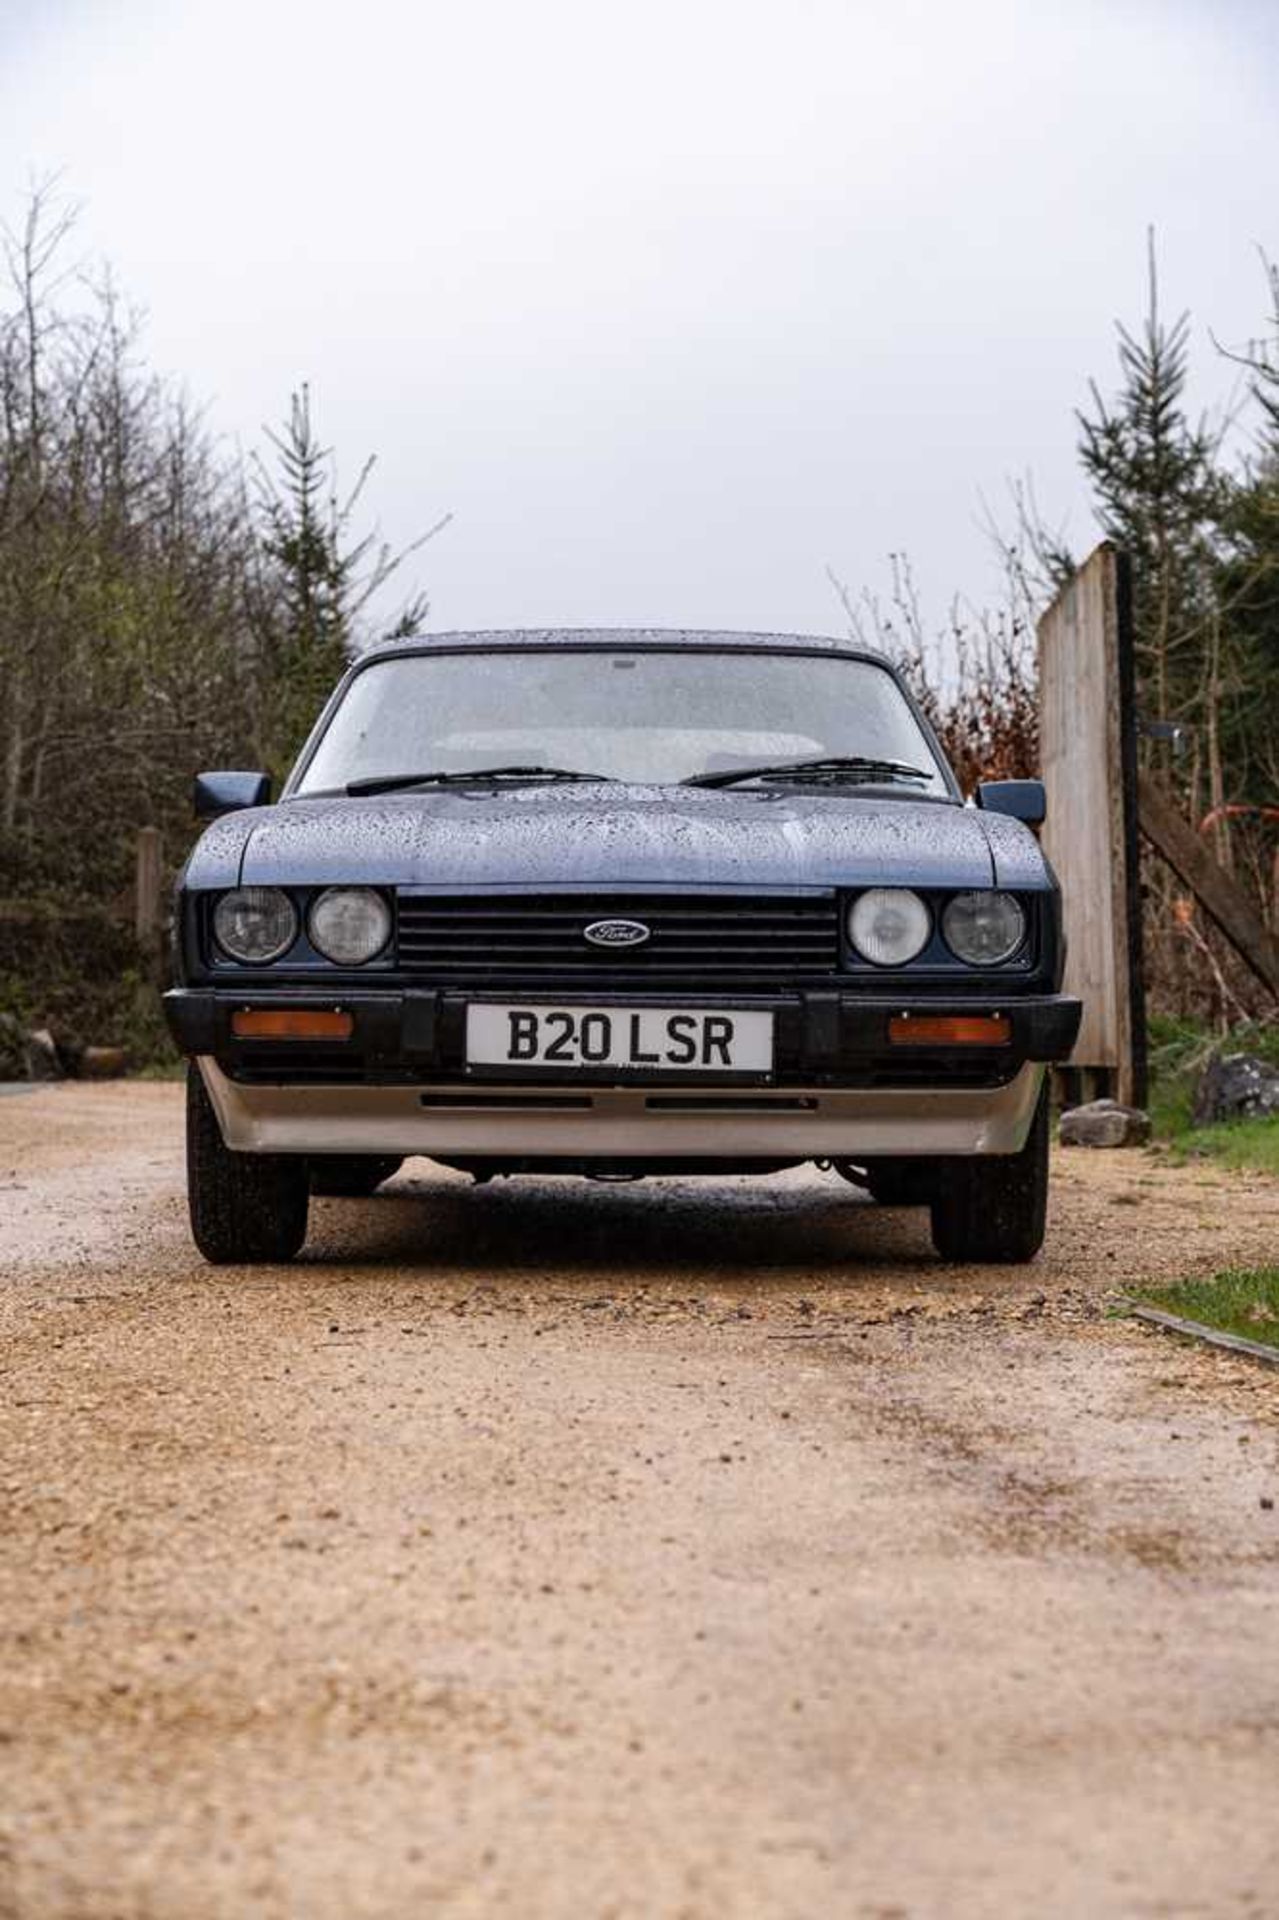 1985 Ford Capri Laser 2.0 Litre Warranted 55,300 miles from new - Image 39 of 67